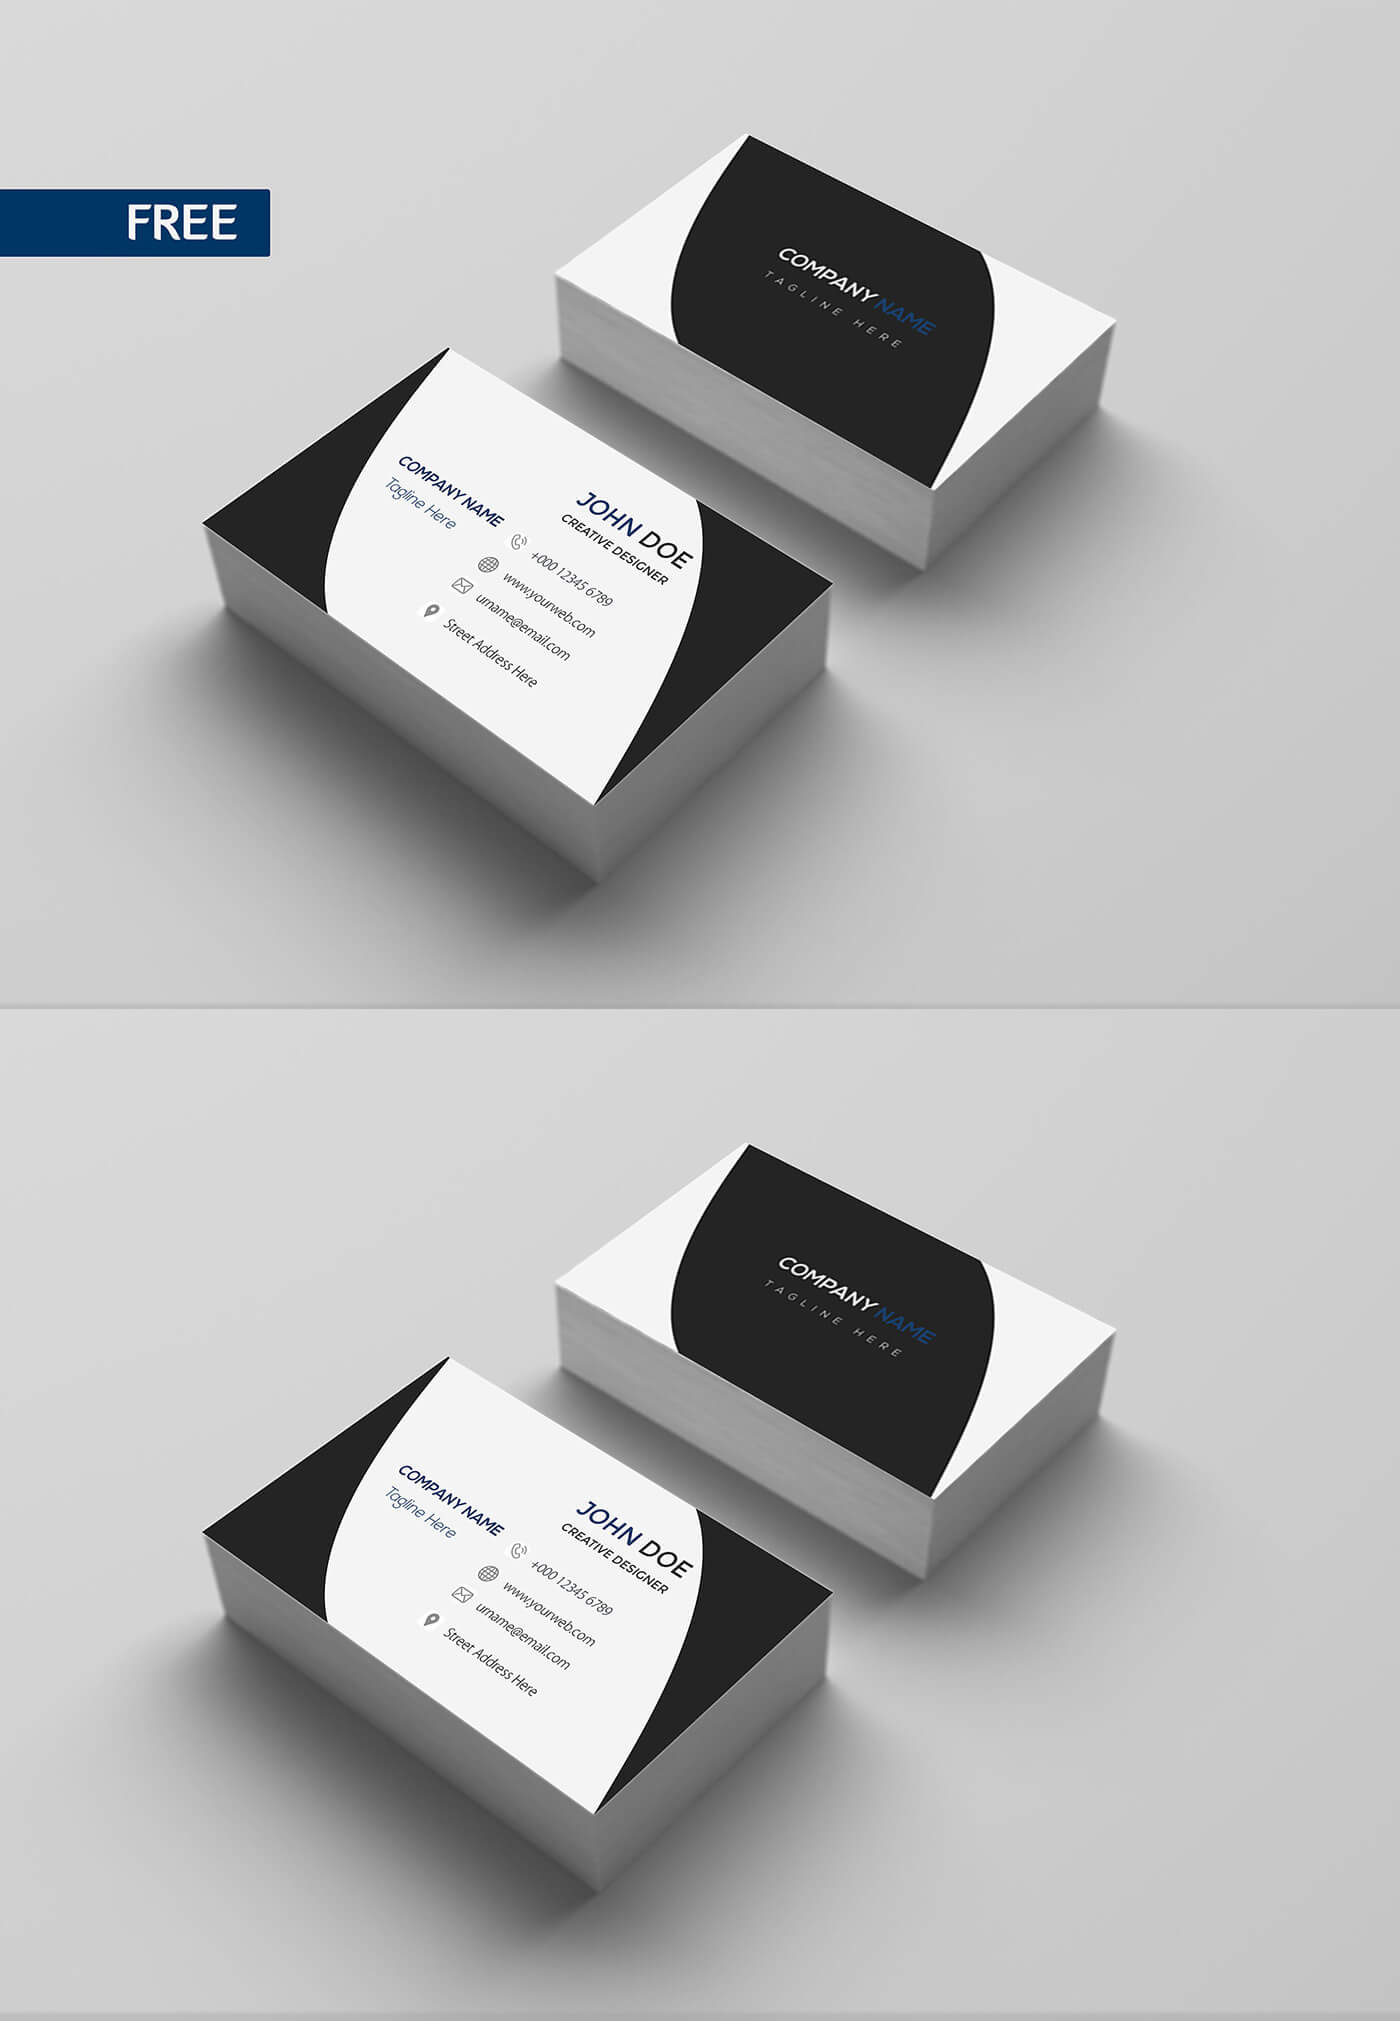 Free Print Design Business Card Template On Behance For Free Template Business Cards To Print